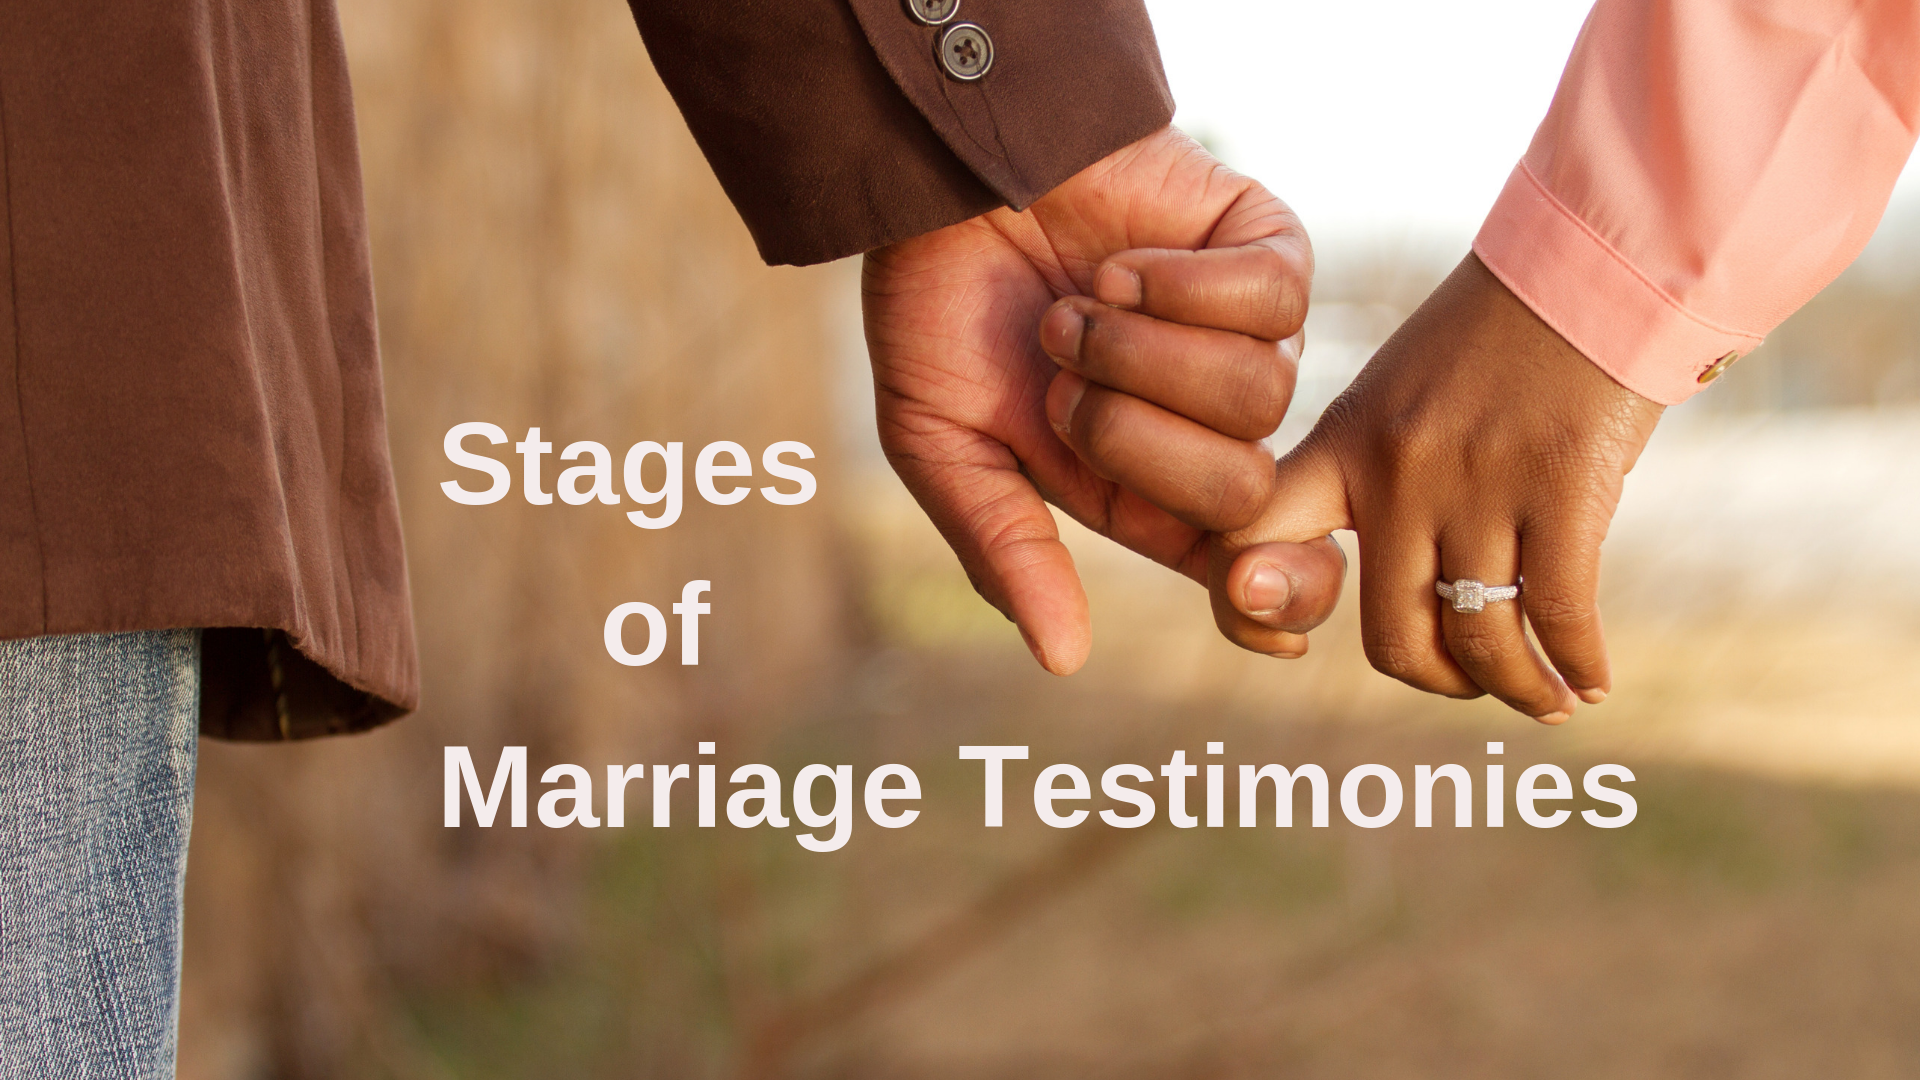 Stages of Marriage Testimonies - Adobe Stock